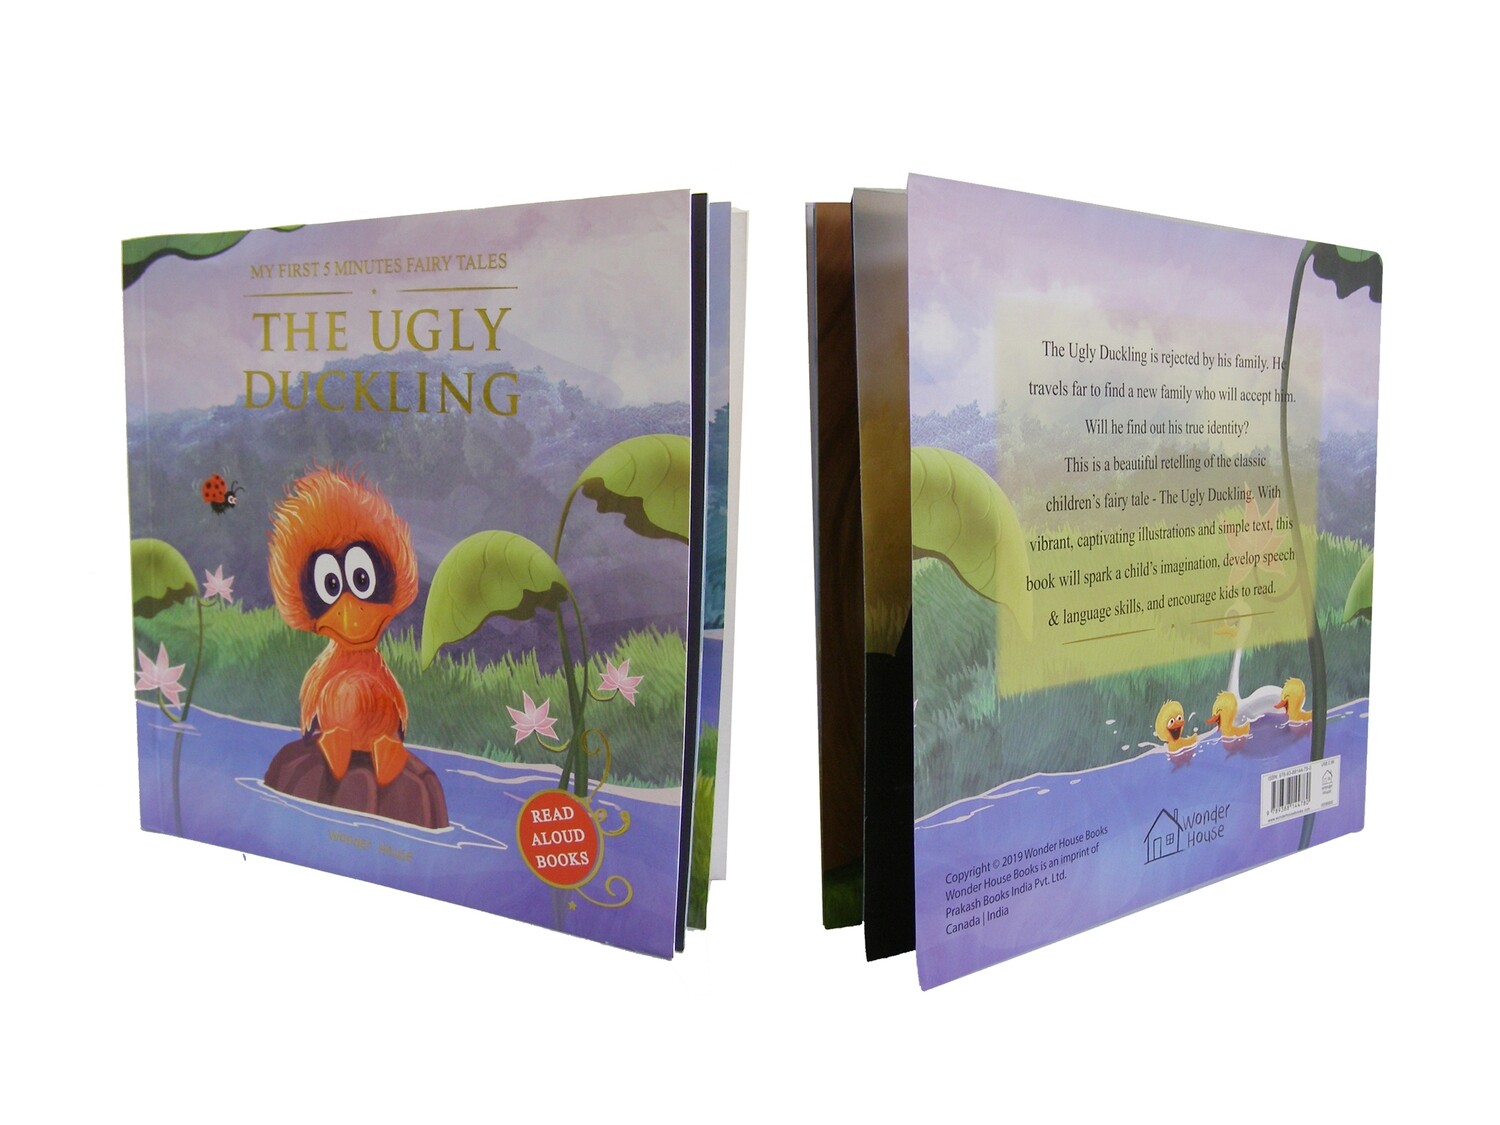 THE UGLY DUCKLING - MY FIRST 5 MINUTES FAIRY TALES BOOK